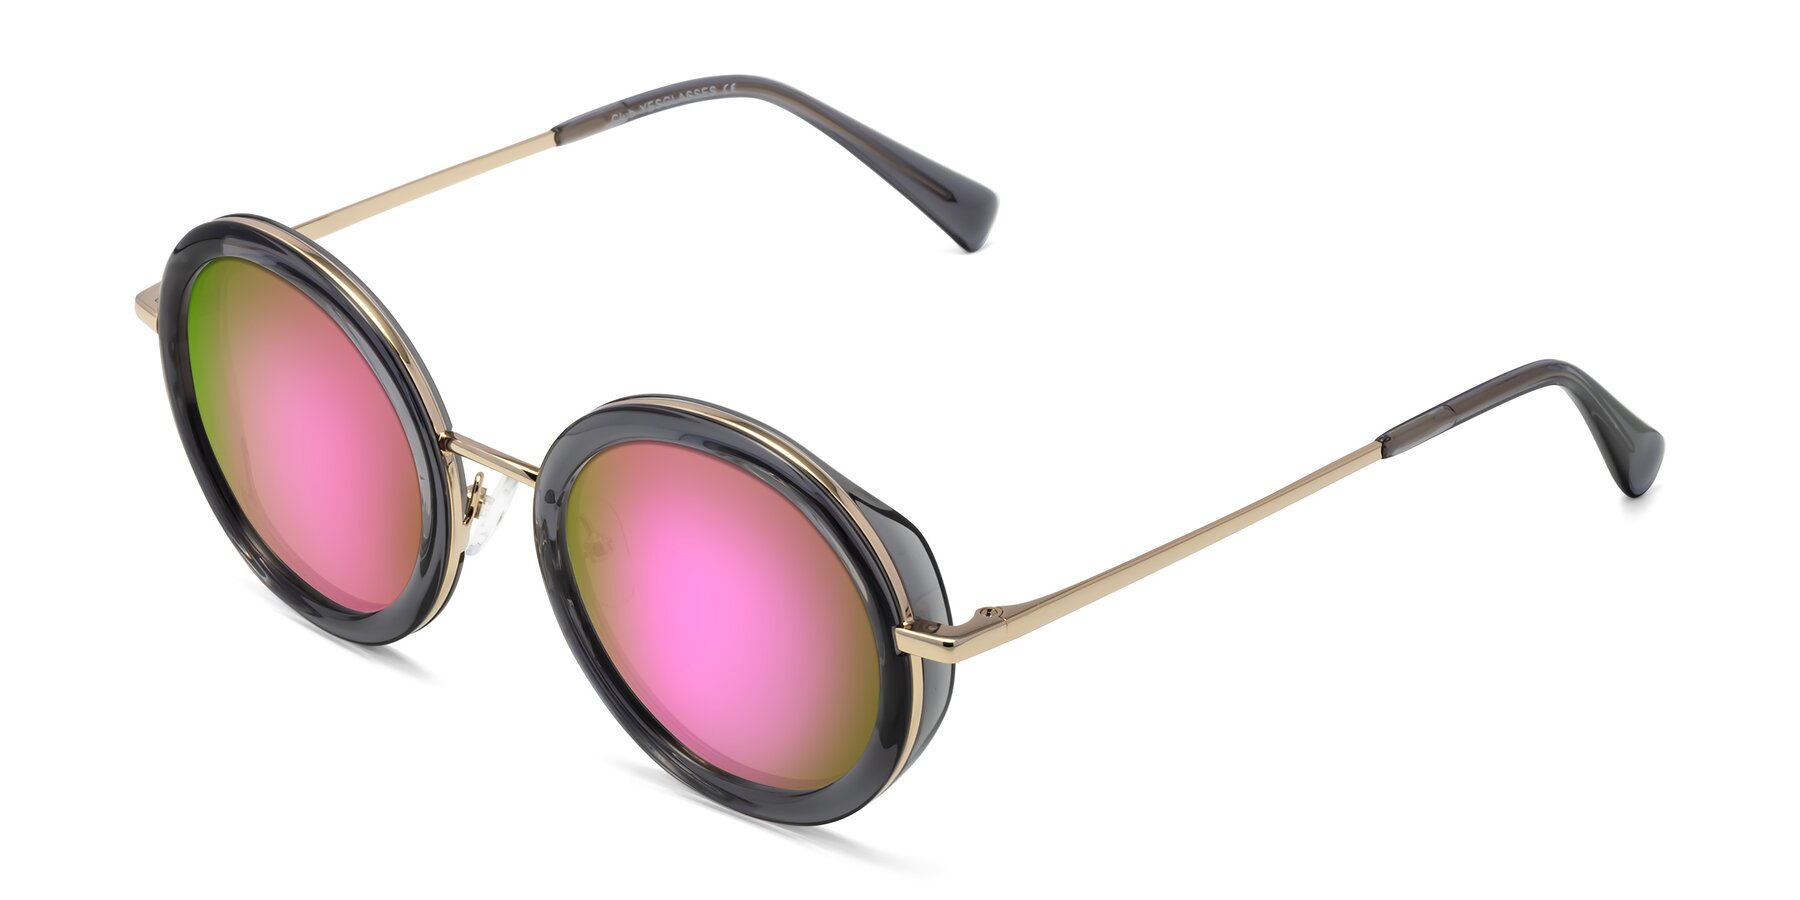 Angle of Club in Gray-Gold with Pink Mirrored Lenses